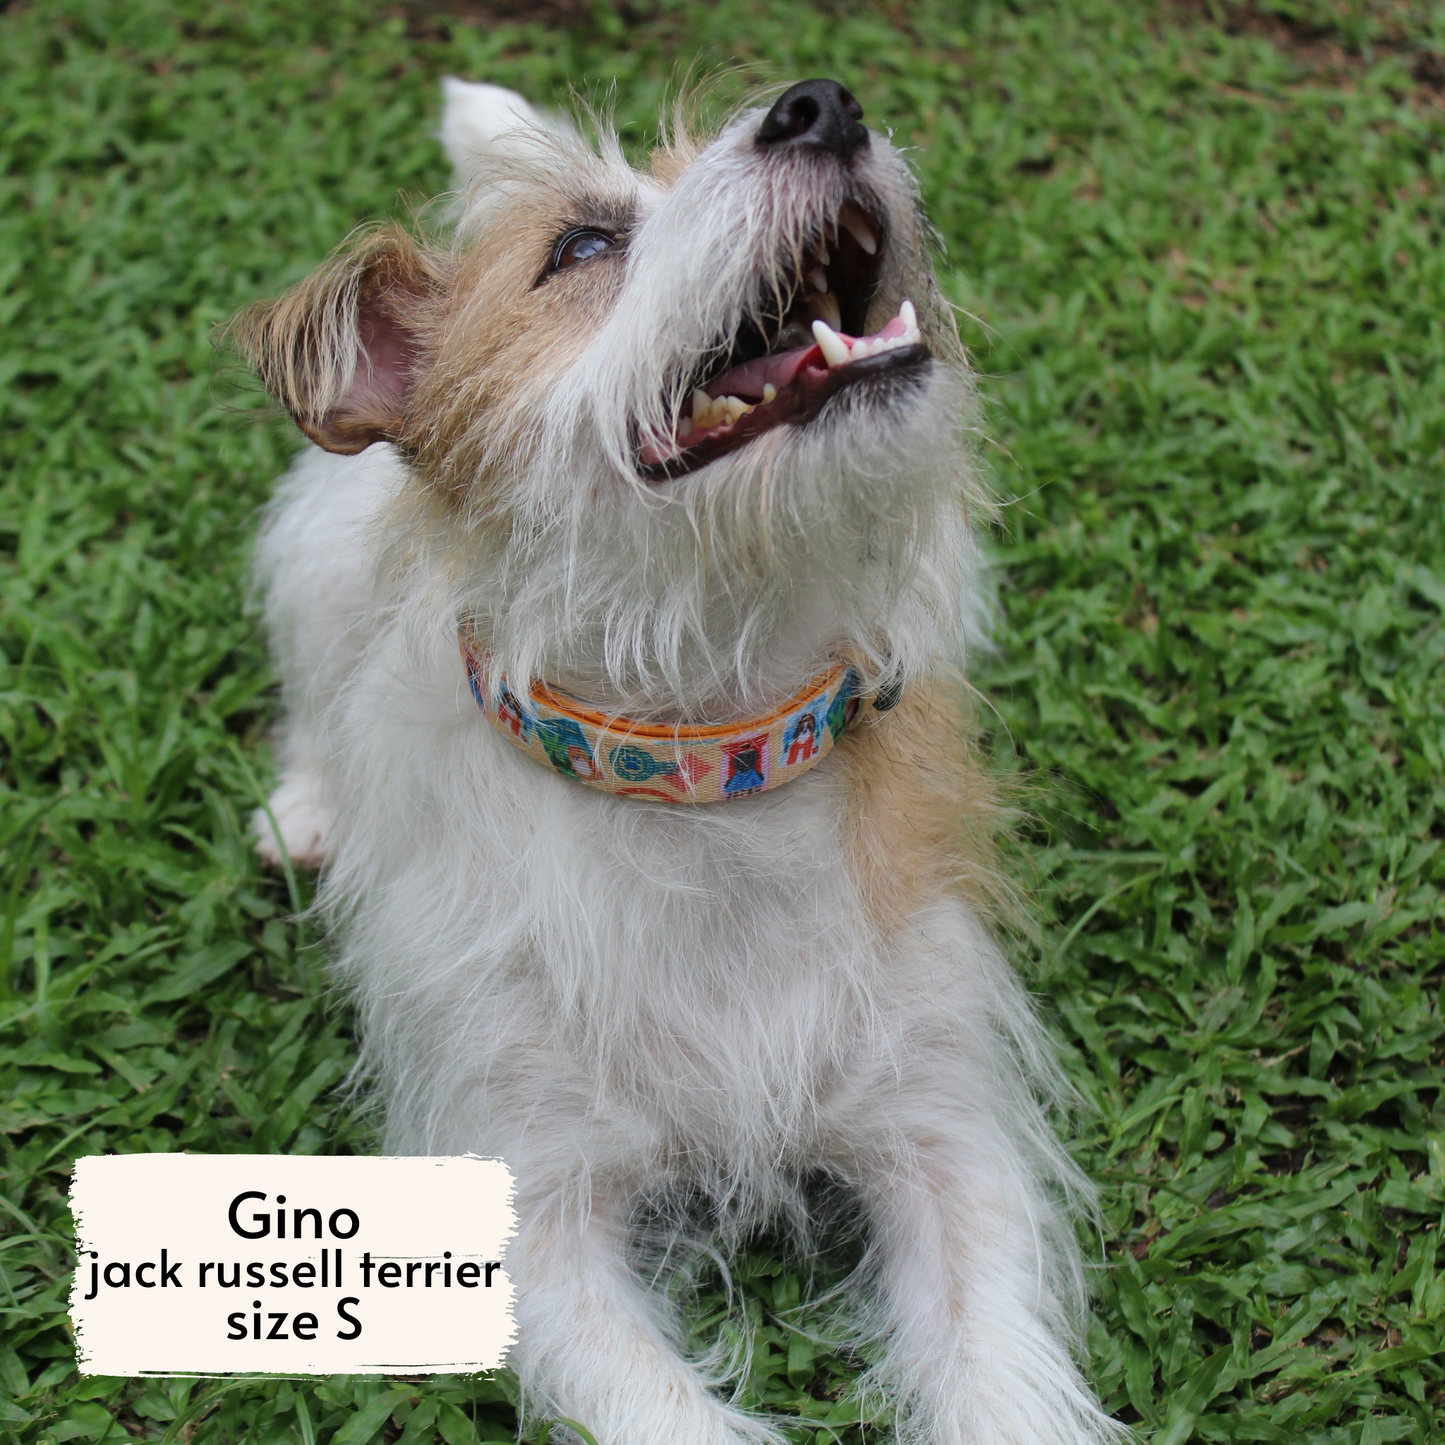 Pata Paw traveling pups collar as seen on a small-sized dog, Gino, a Jack Russell Terrier